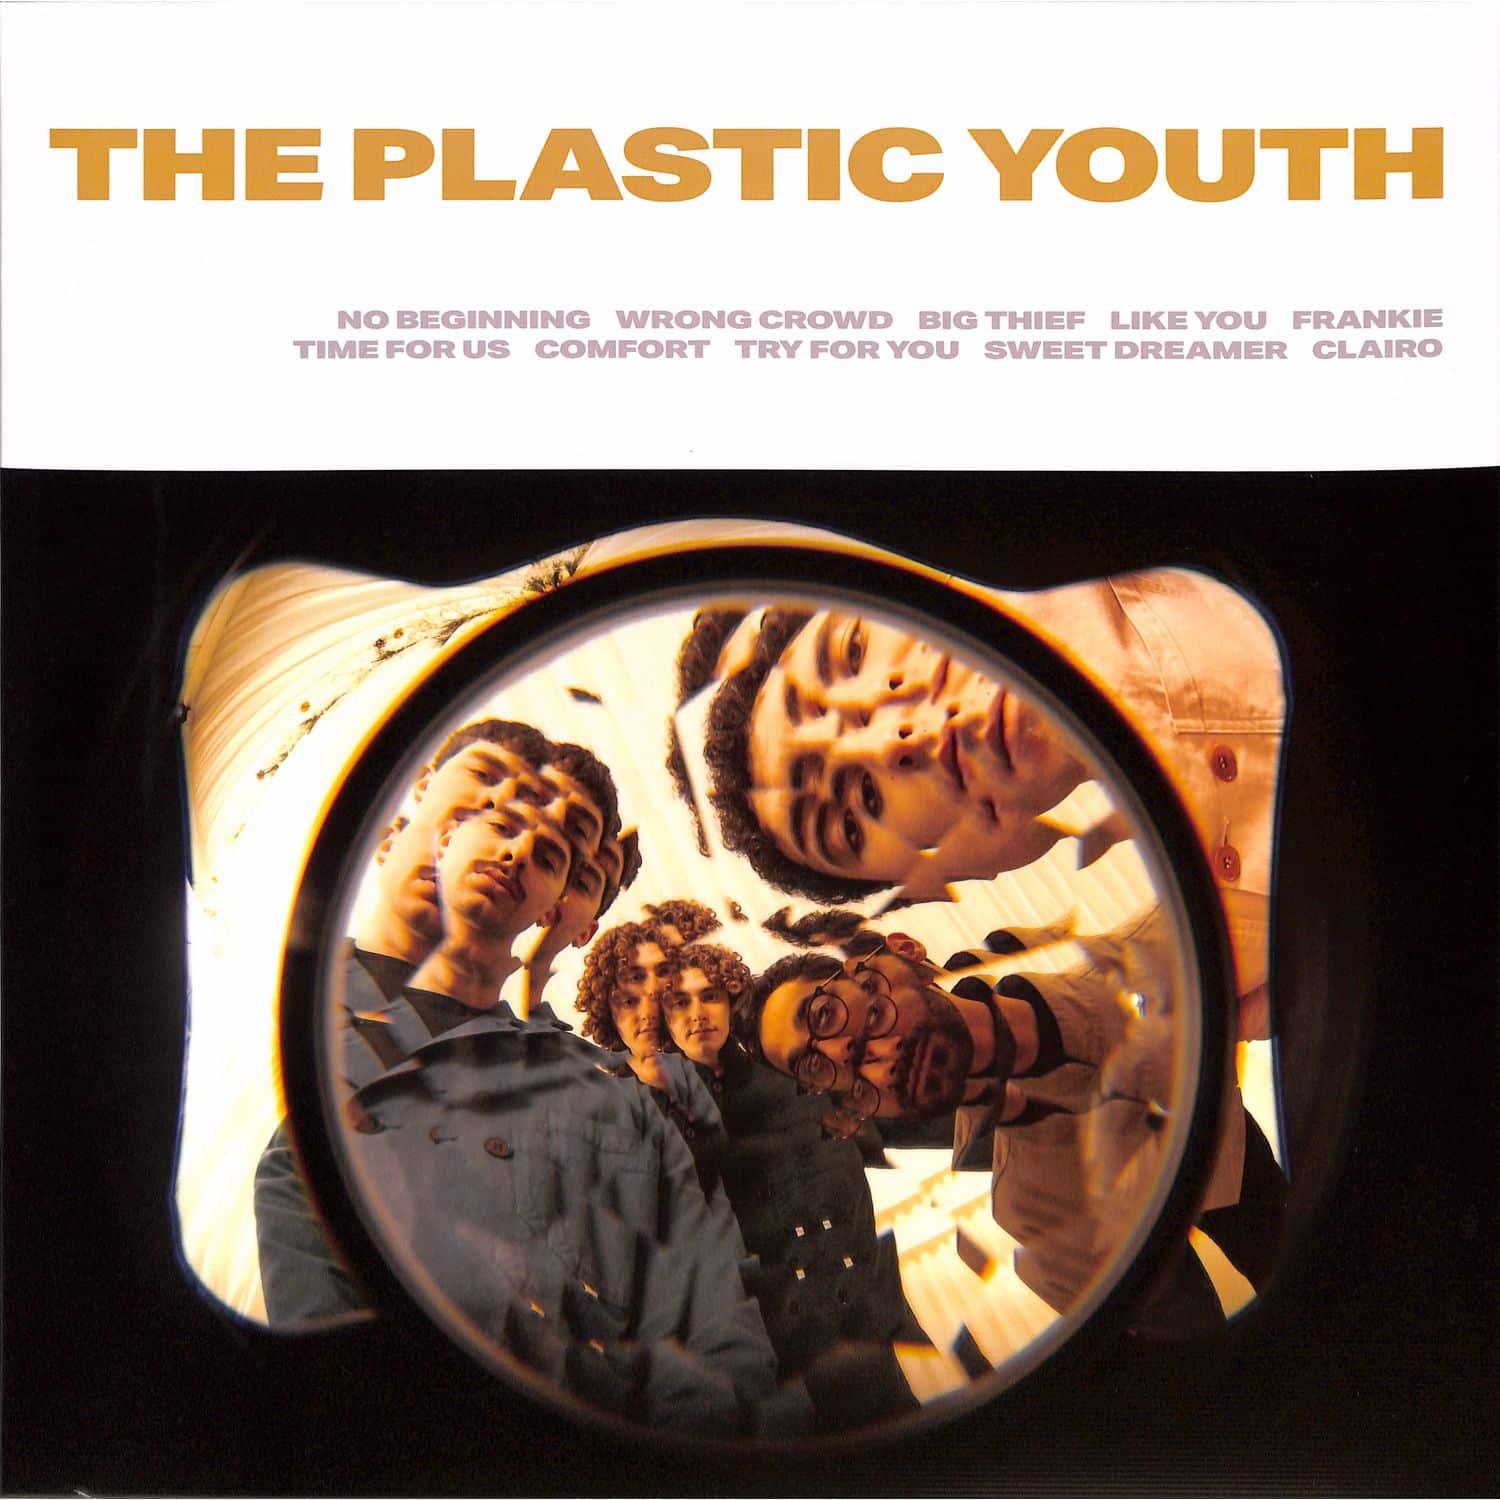 The Plastic Youth - THE PLASTIC YOUTH 